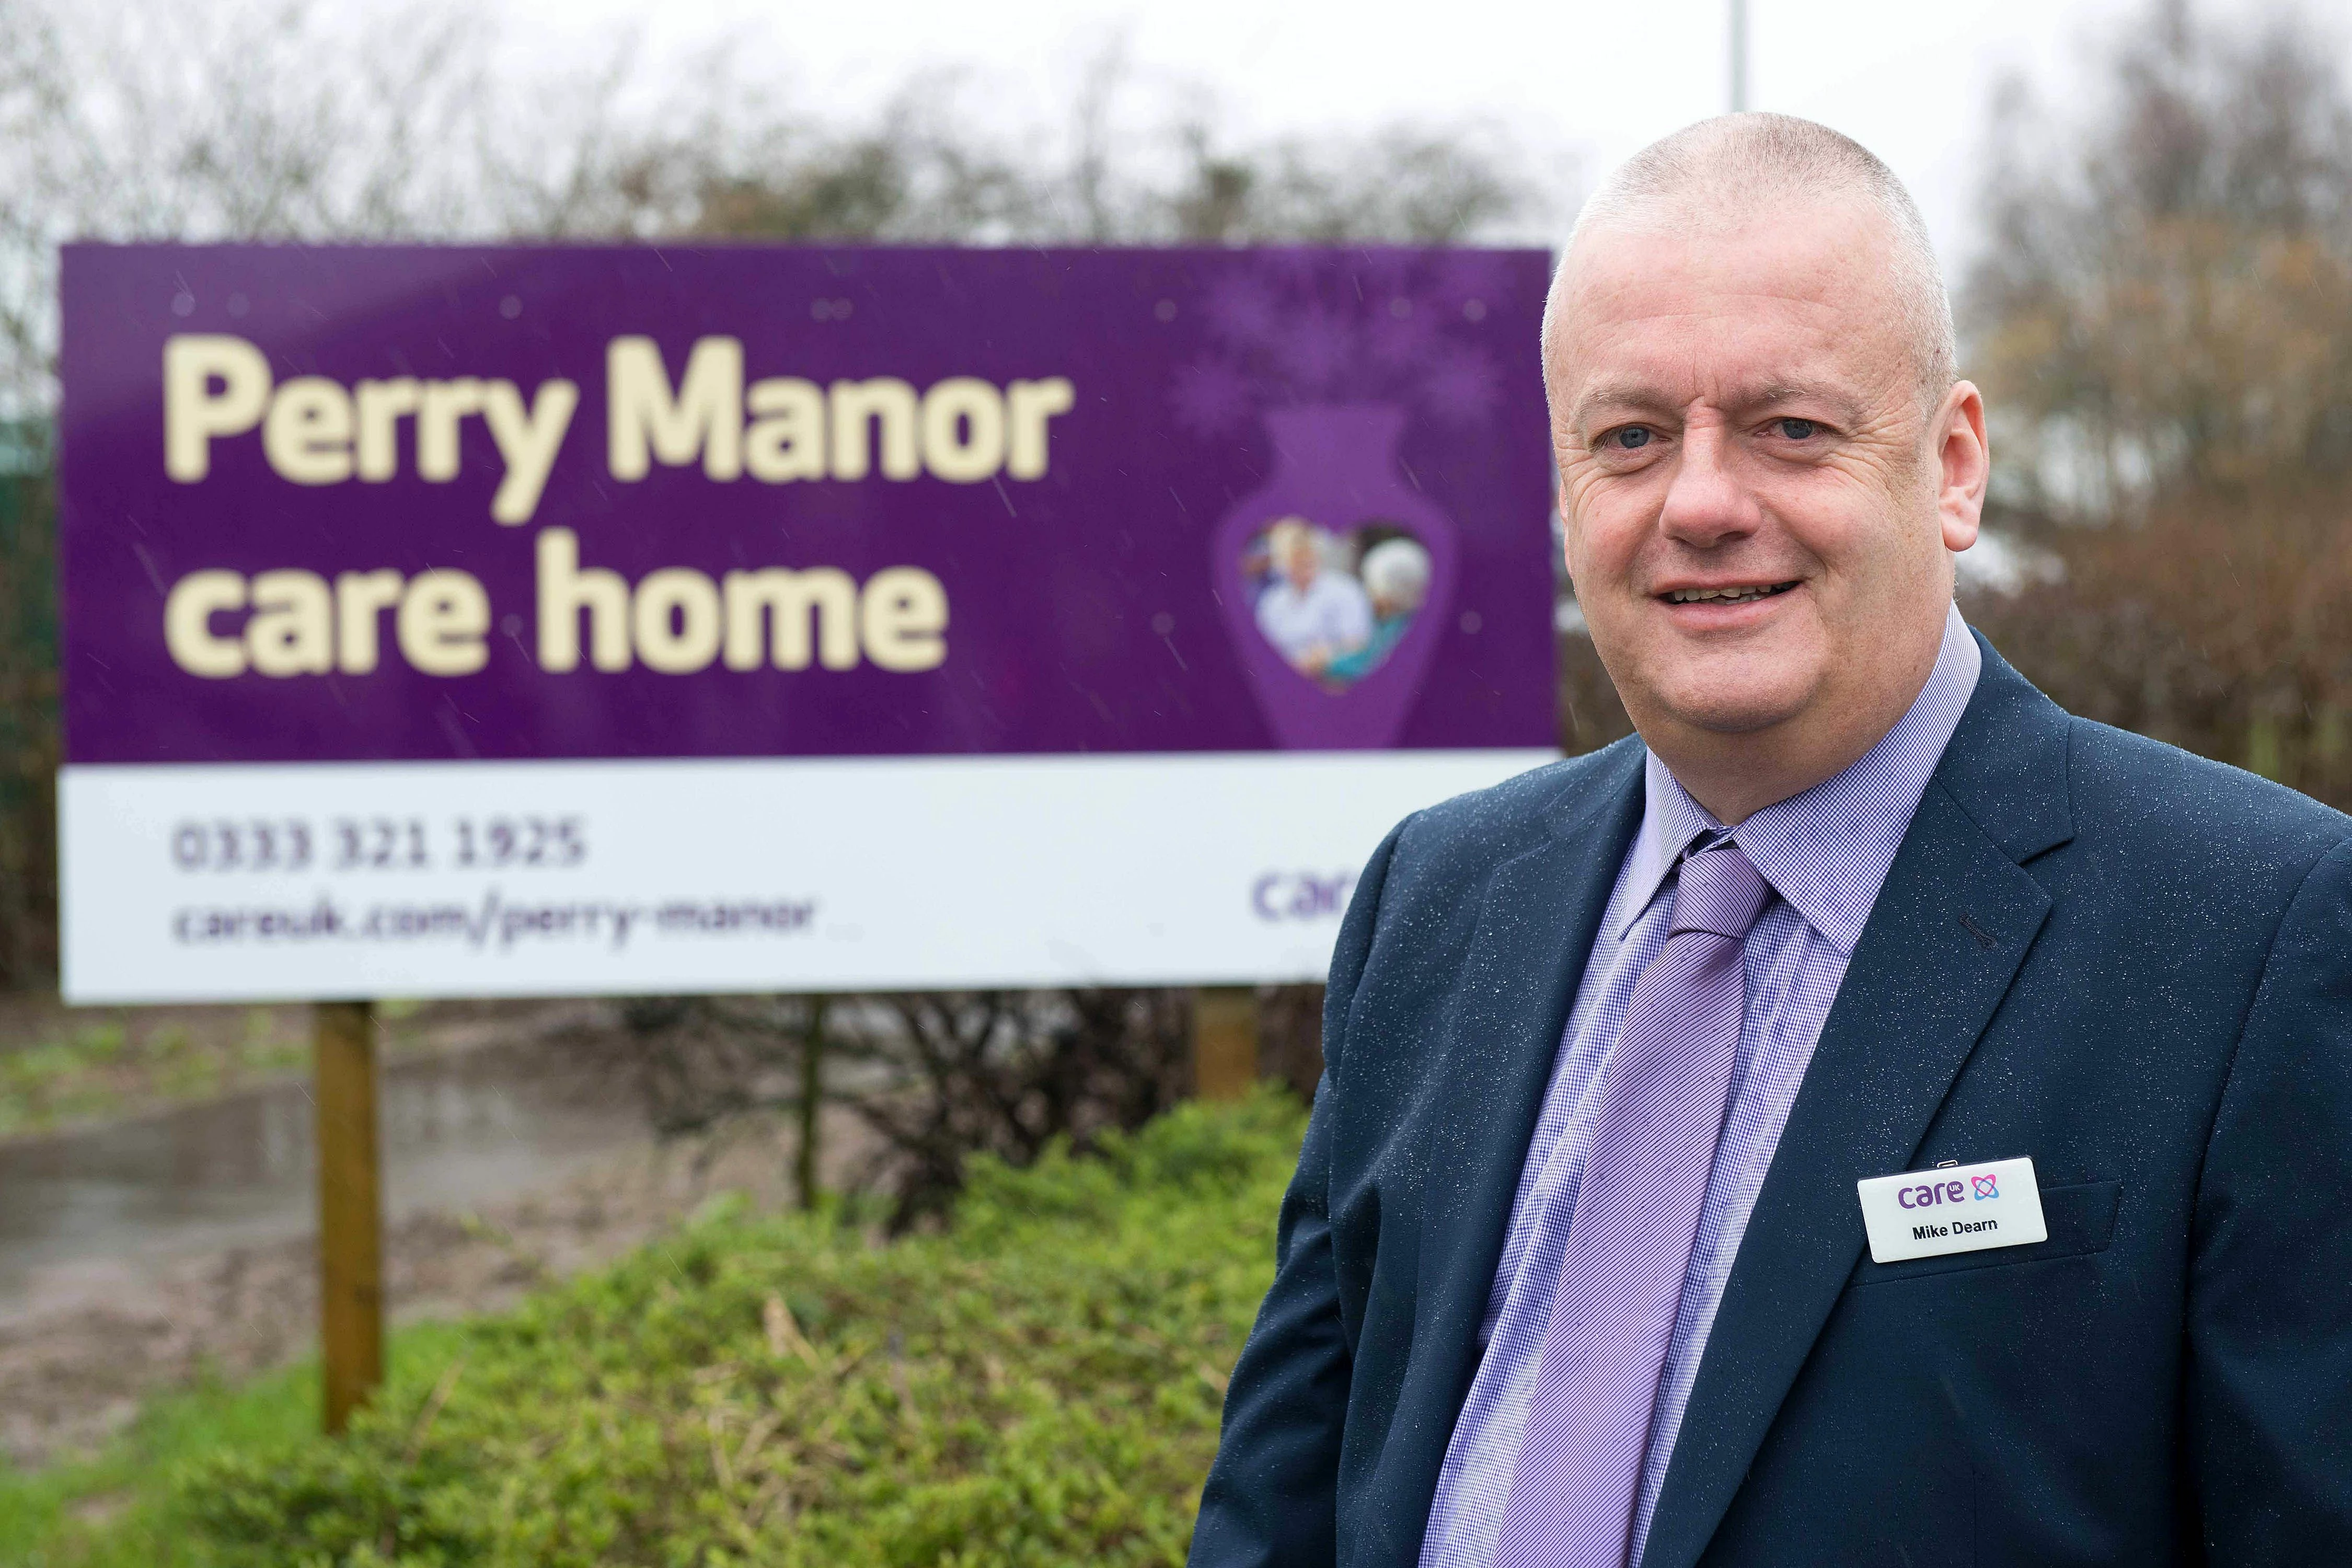 Mike Dearn, New Manager at Perry Manor Care Home